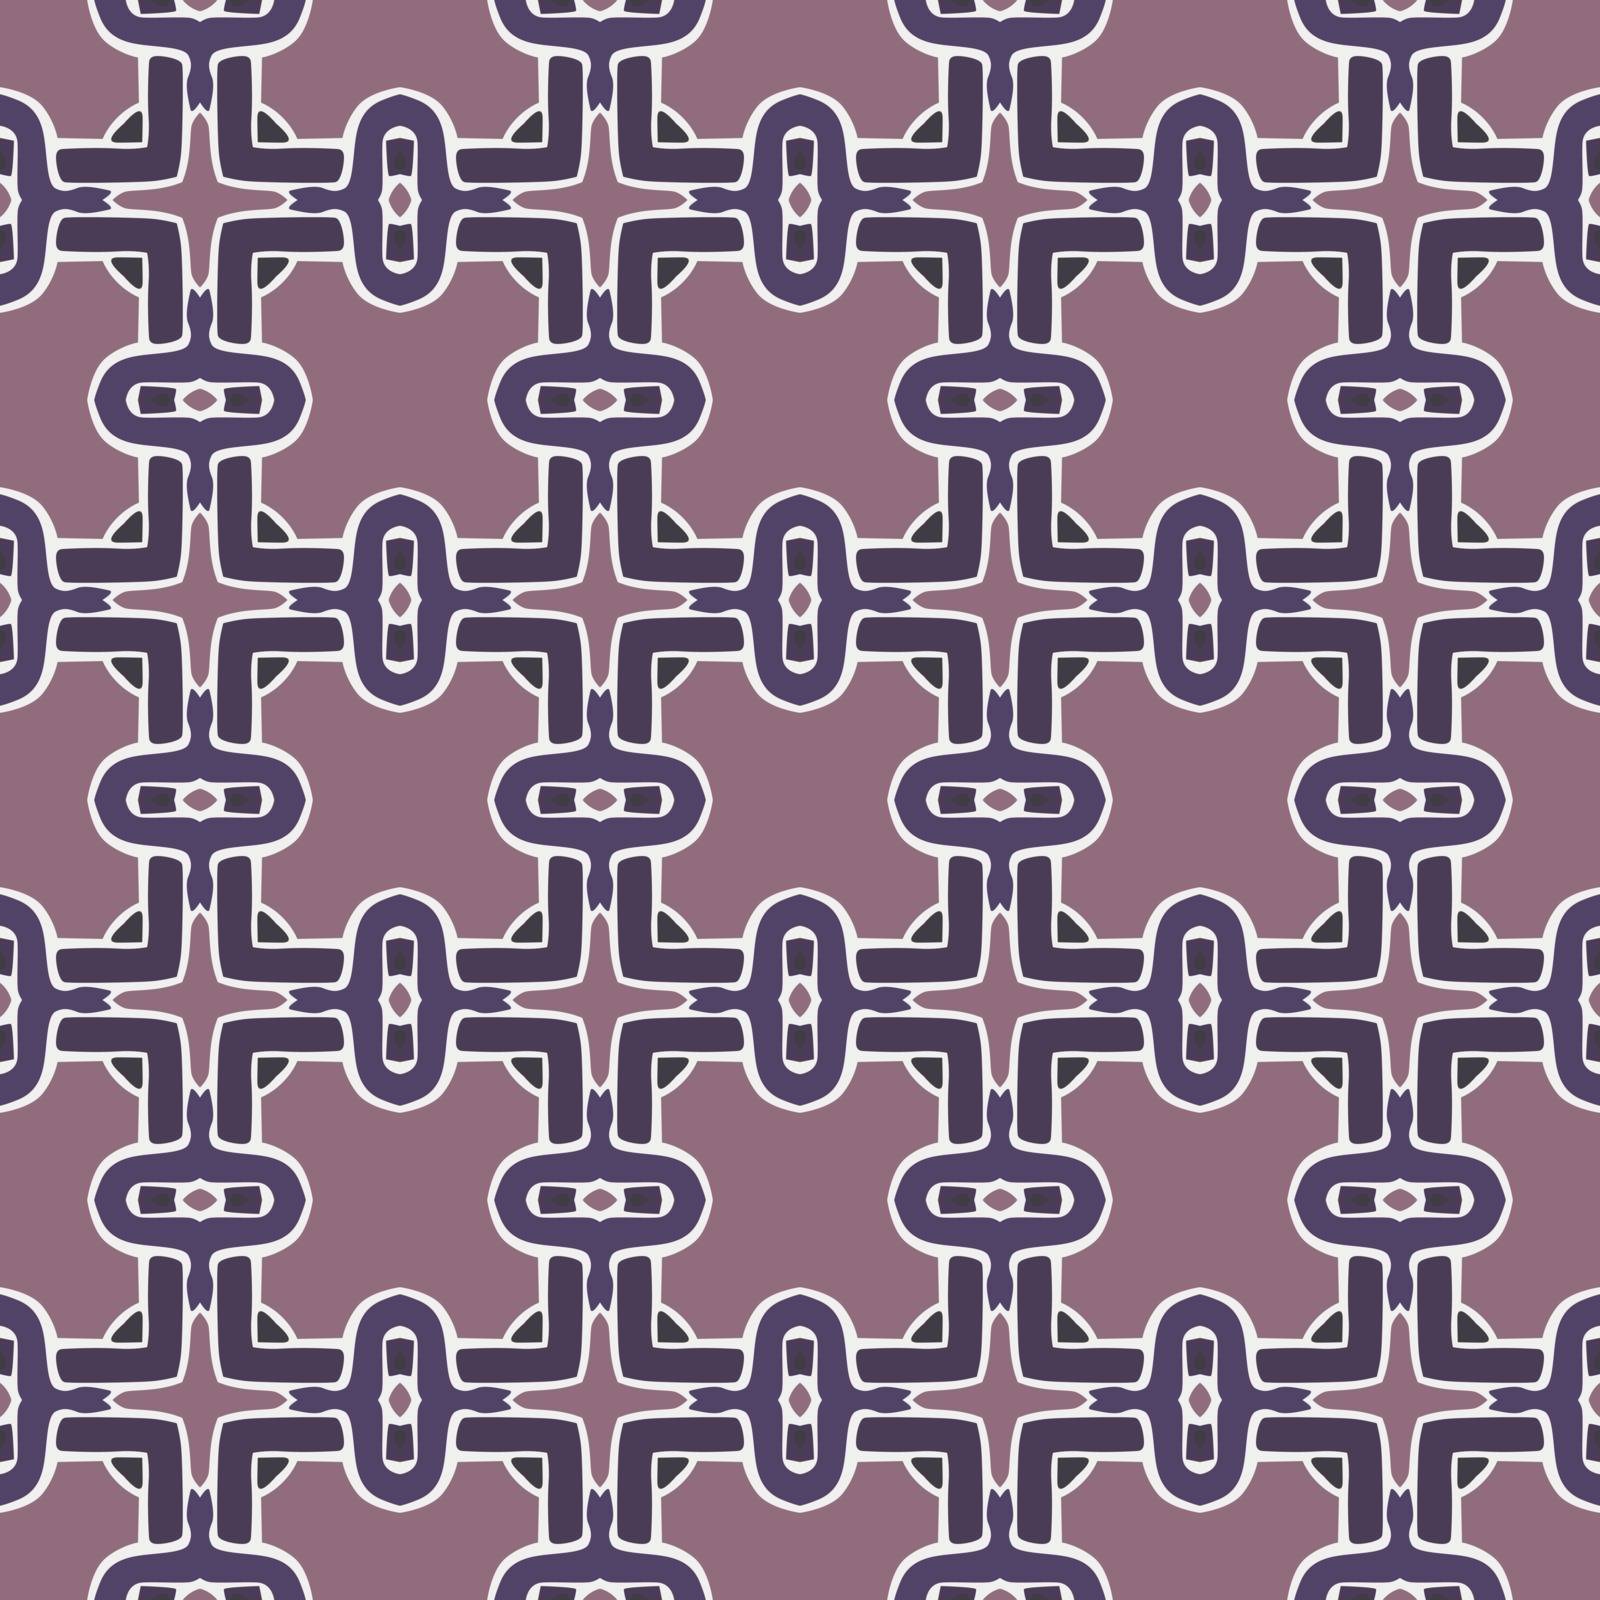 Seamless illustrated pattern made of abstract elements in beige and shades of purple